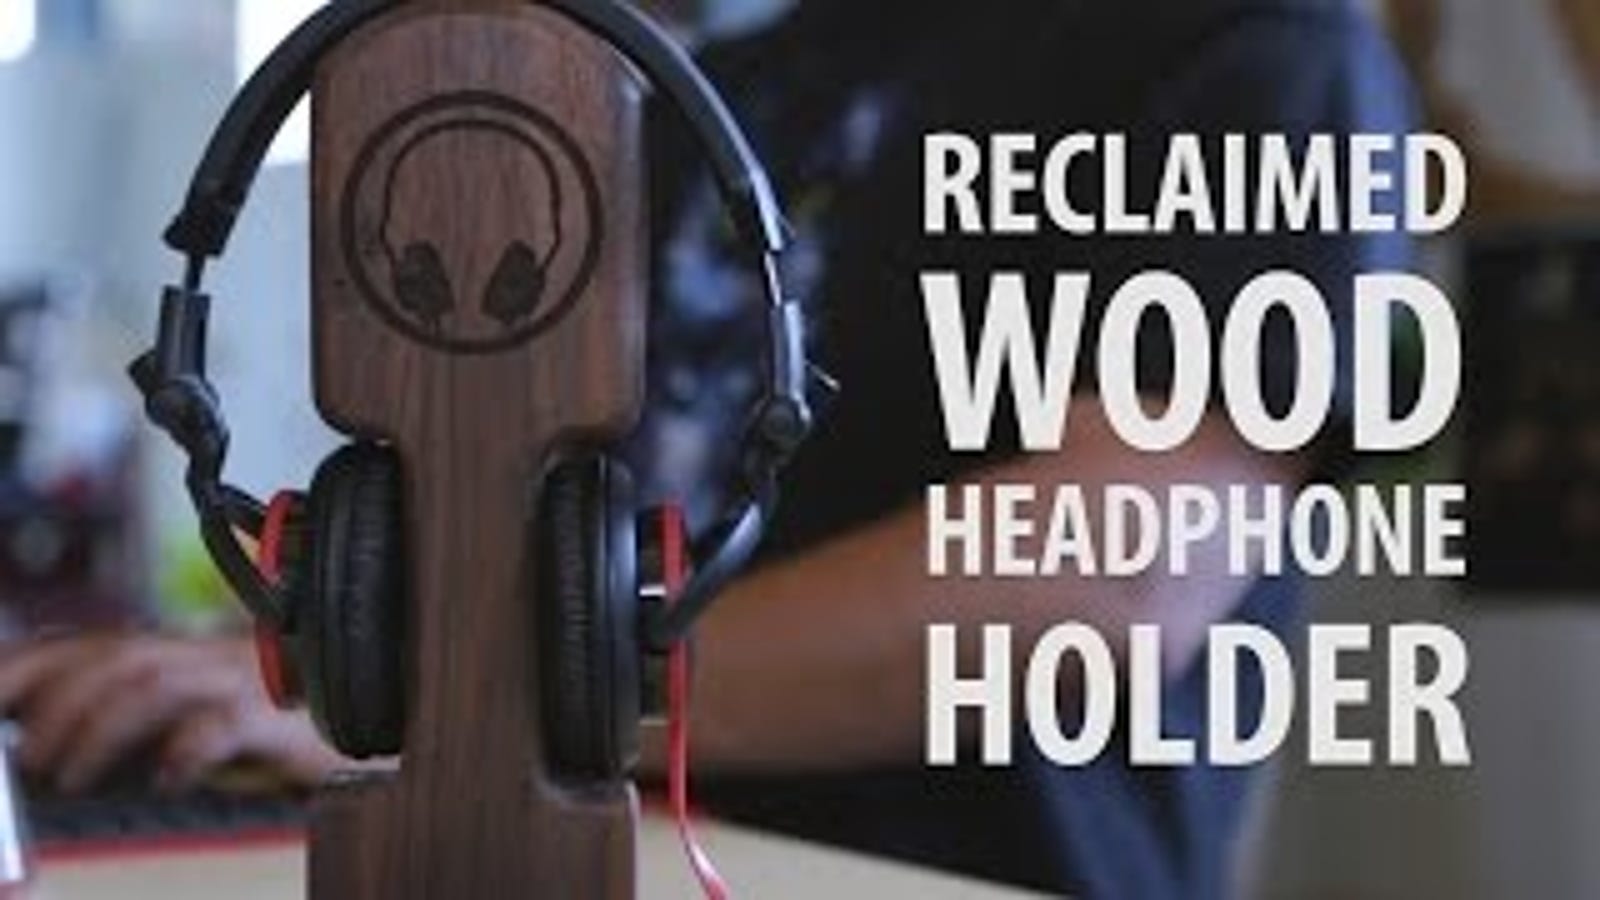 This DIY Headphone Holder Is Easy to Make, Built from 